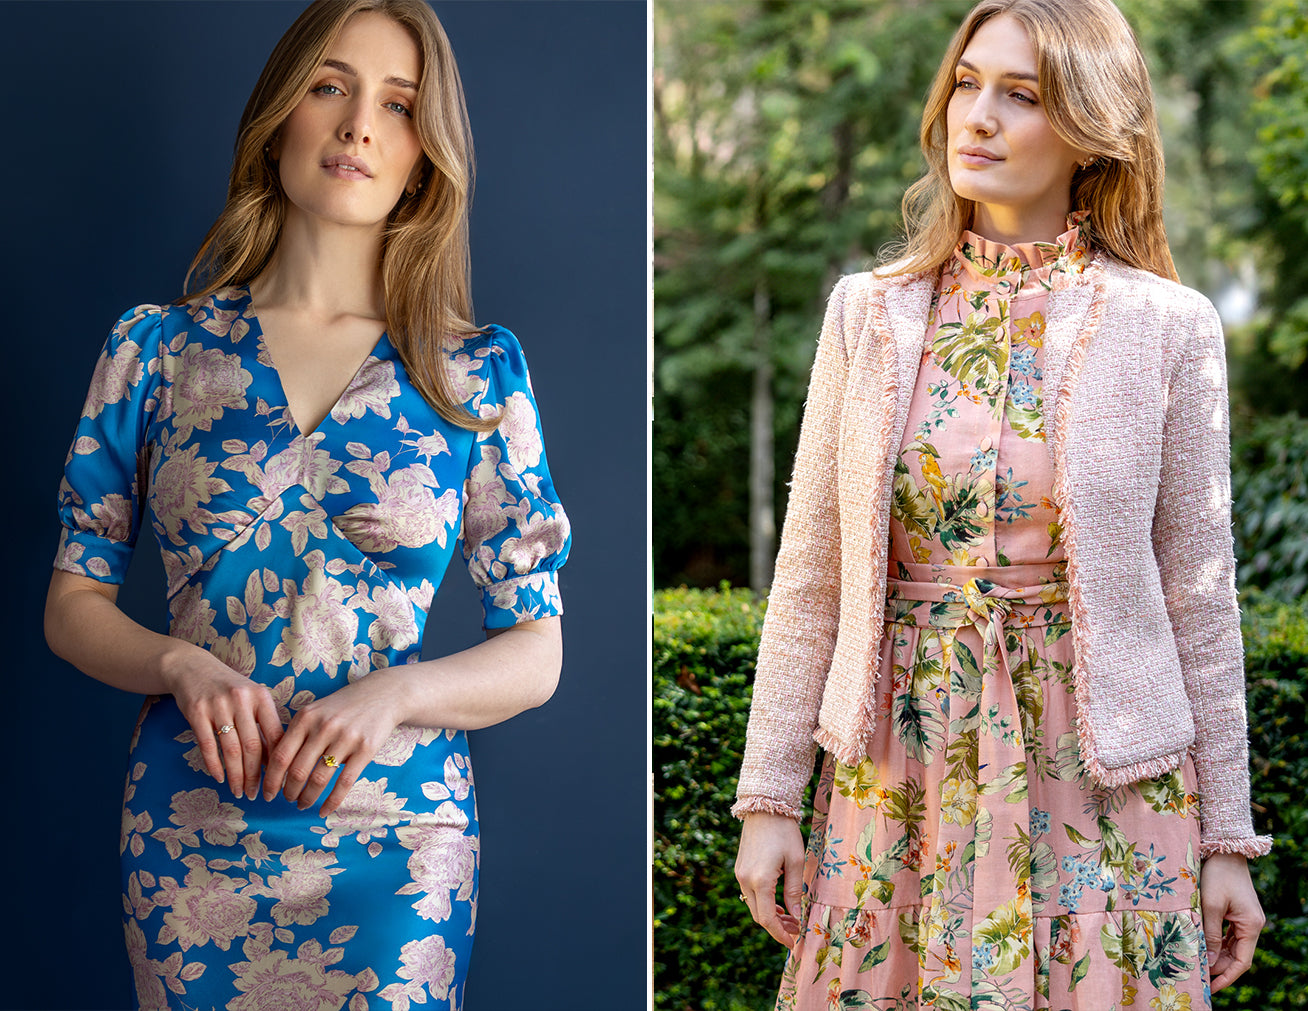 ridleylondon-spring-wedding-guest-dress-edit-floral-printed-silk-with-roses